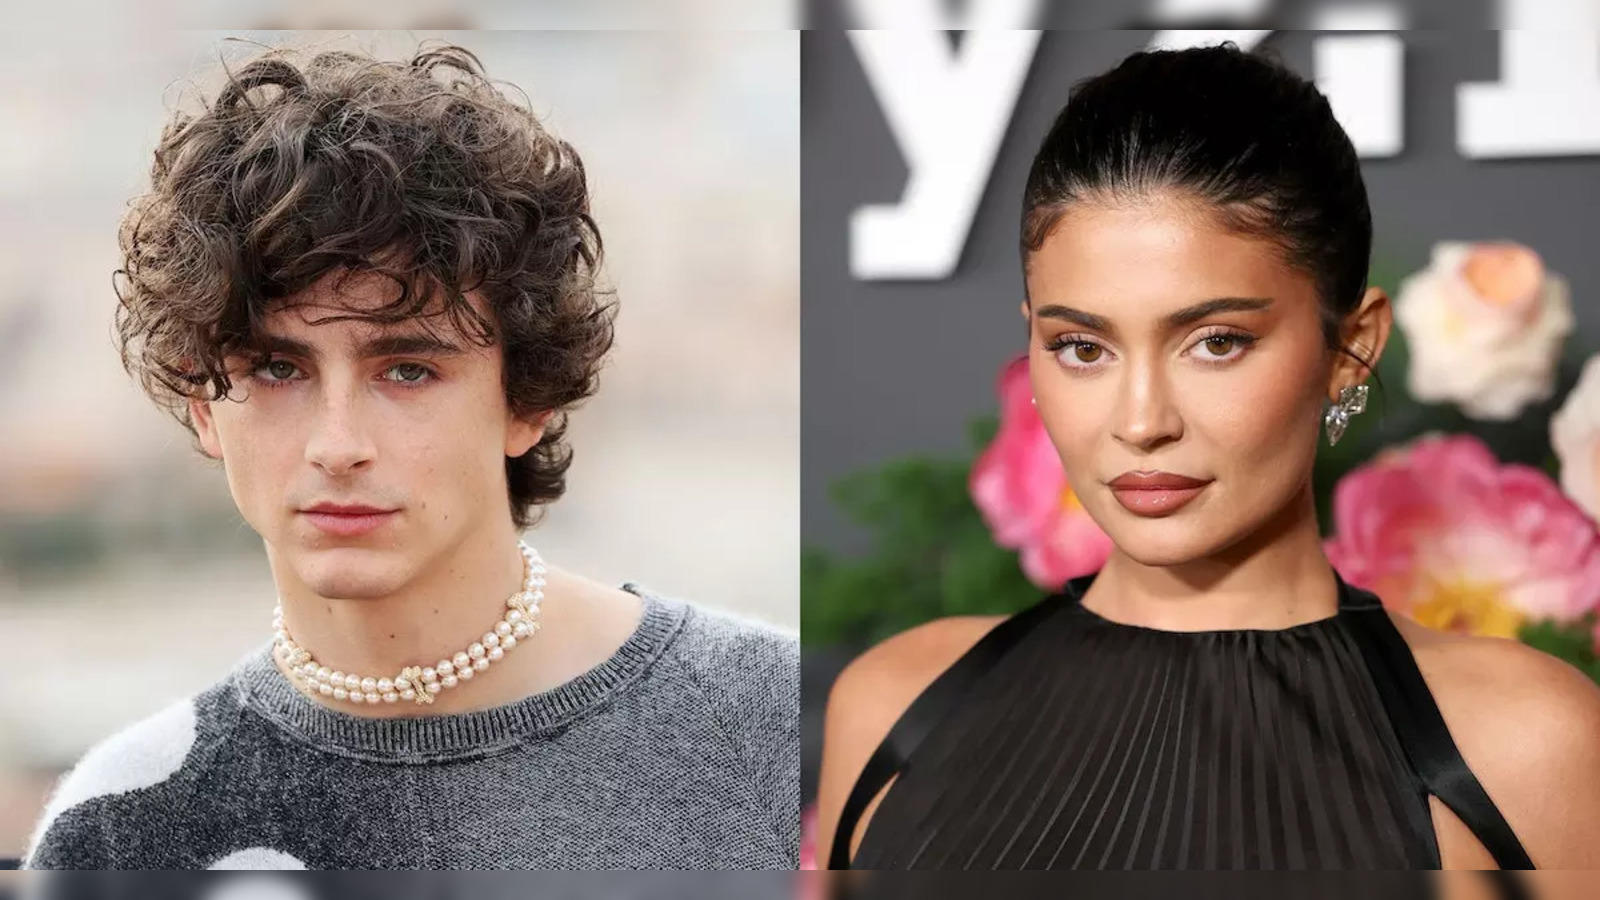 KYLIE Jenner: Are Kylie Jenner and Timothee Chalamet still